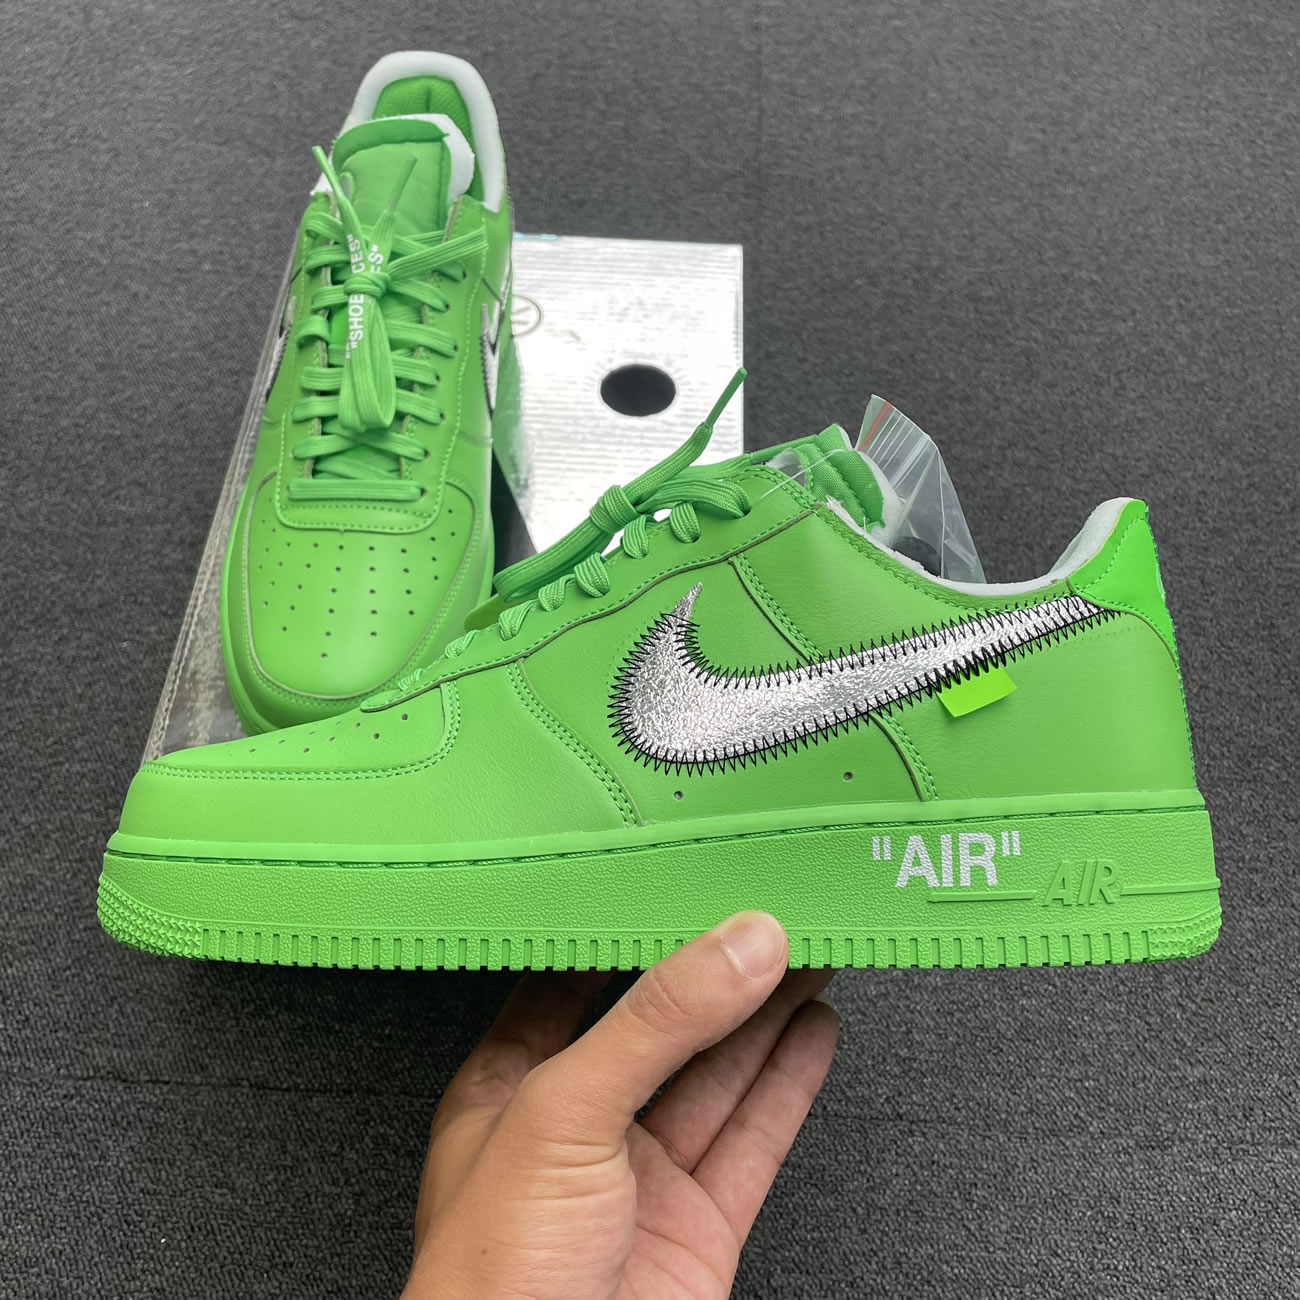 Off White Nike Air Force 1 Low Light Green (42) - newkick.org